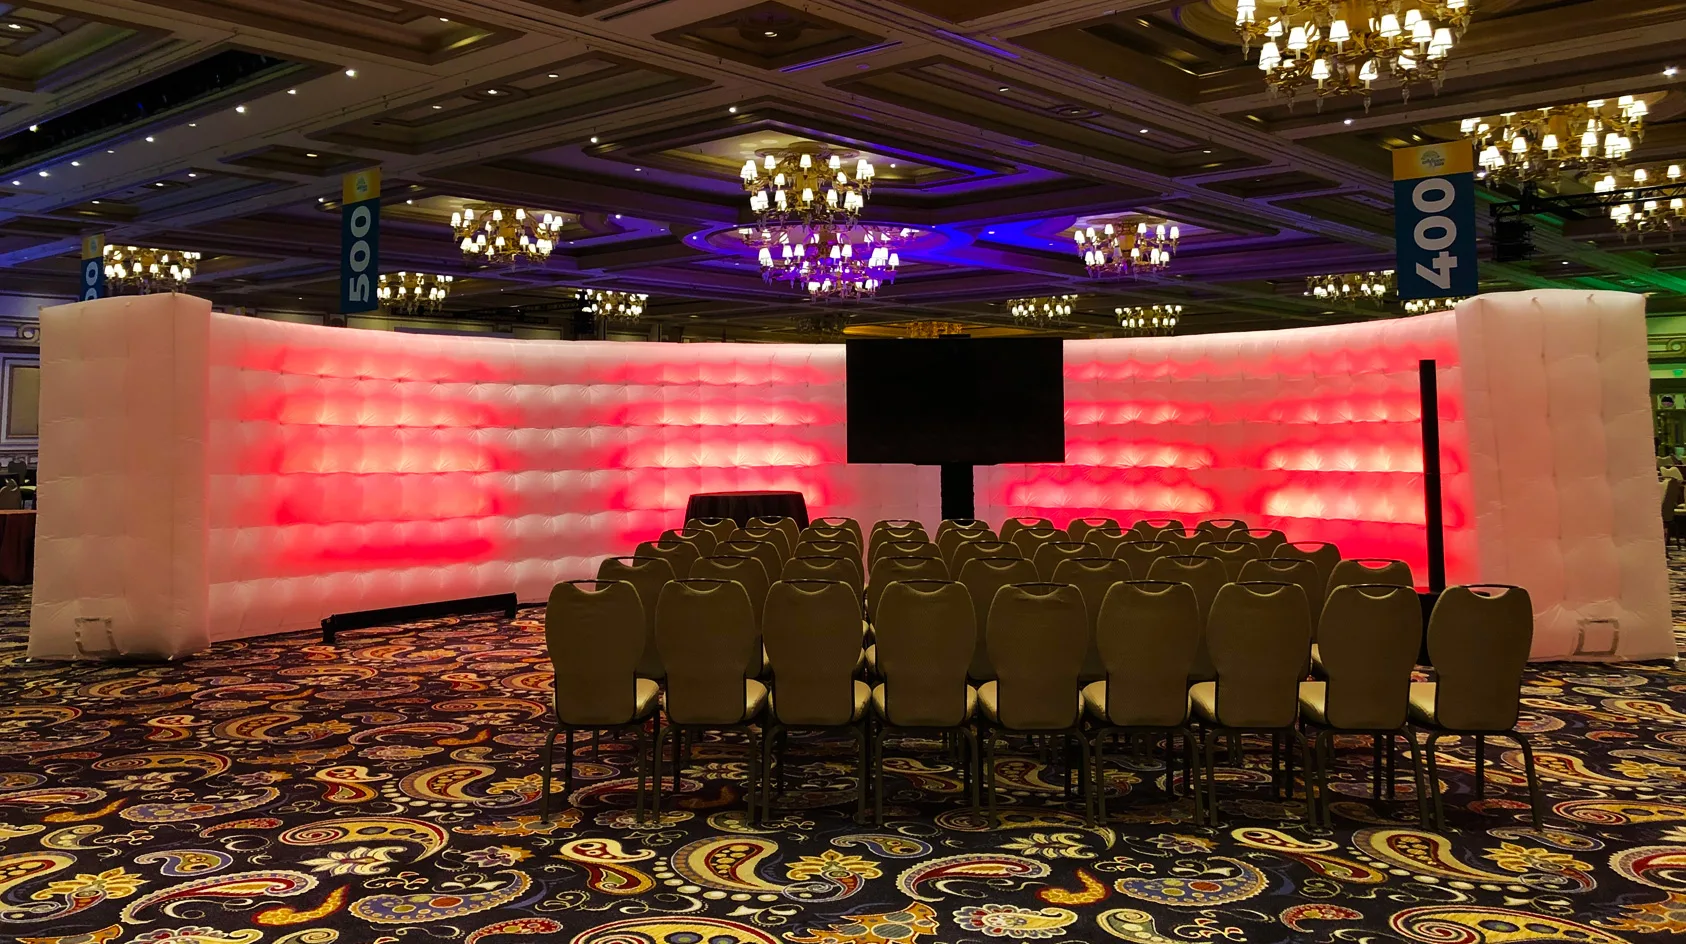 Pic showing a Created By Air C wall illuminated with red LED lighting and presentation seating set out in front